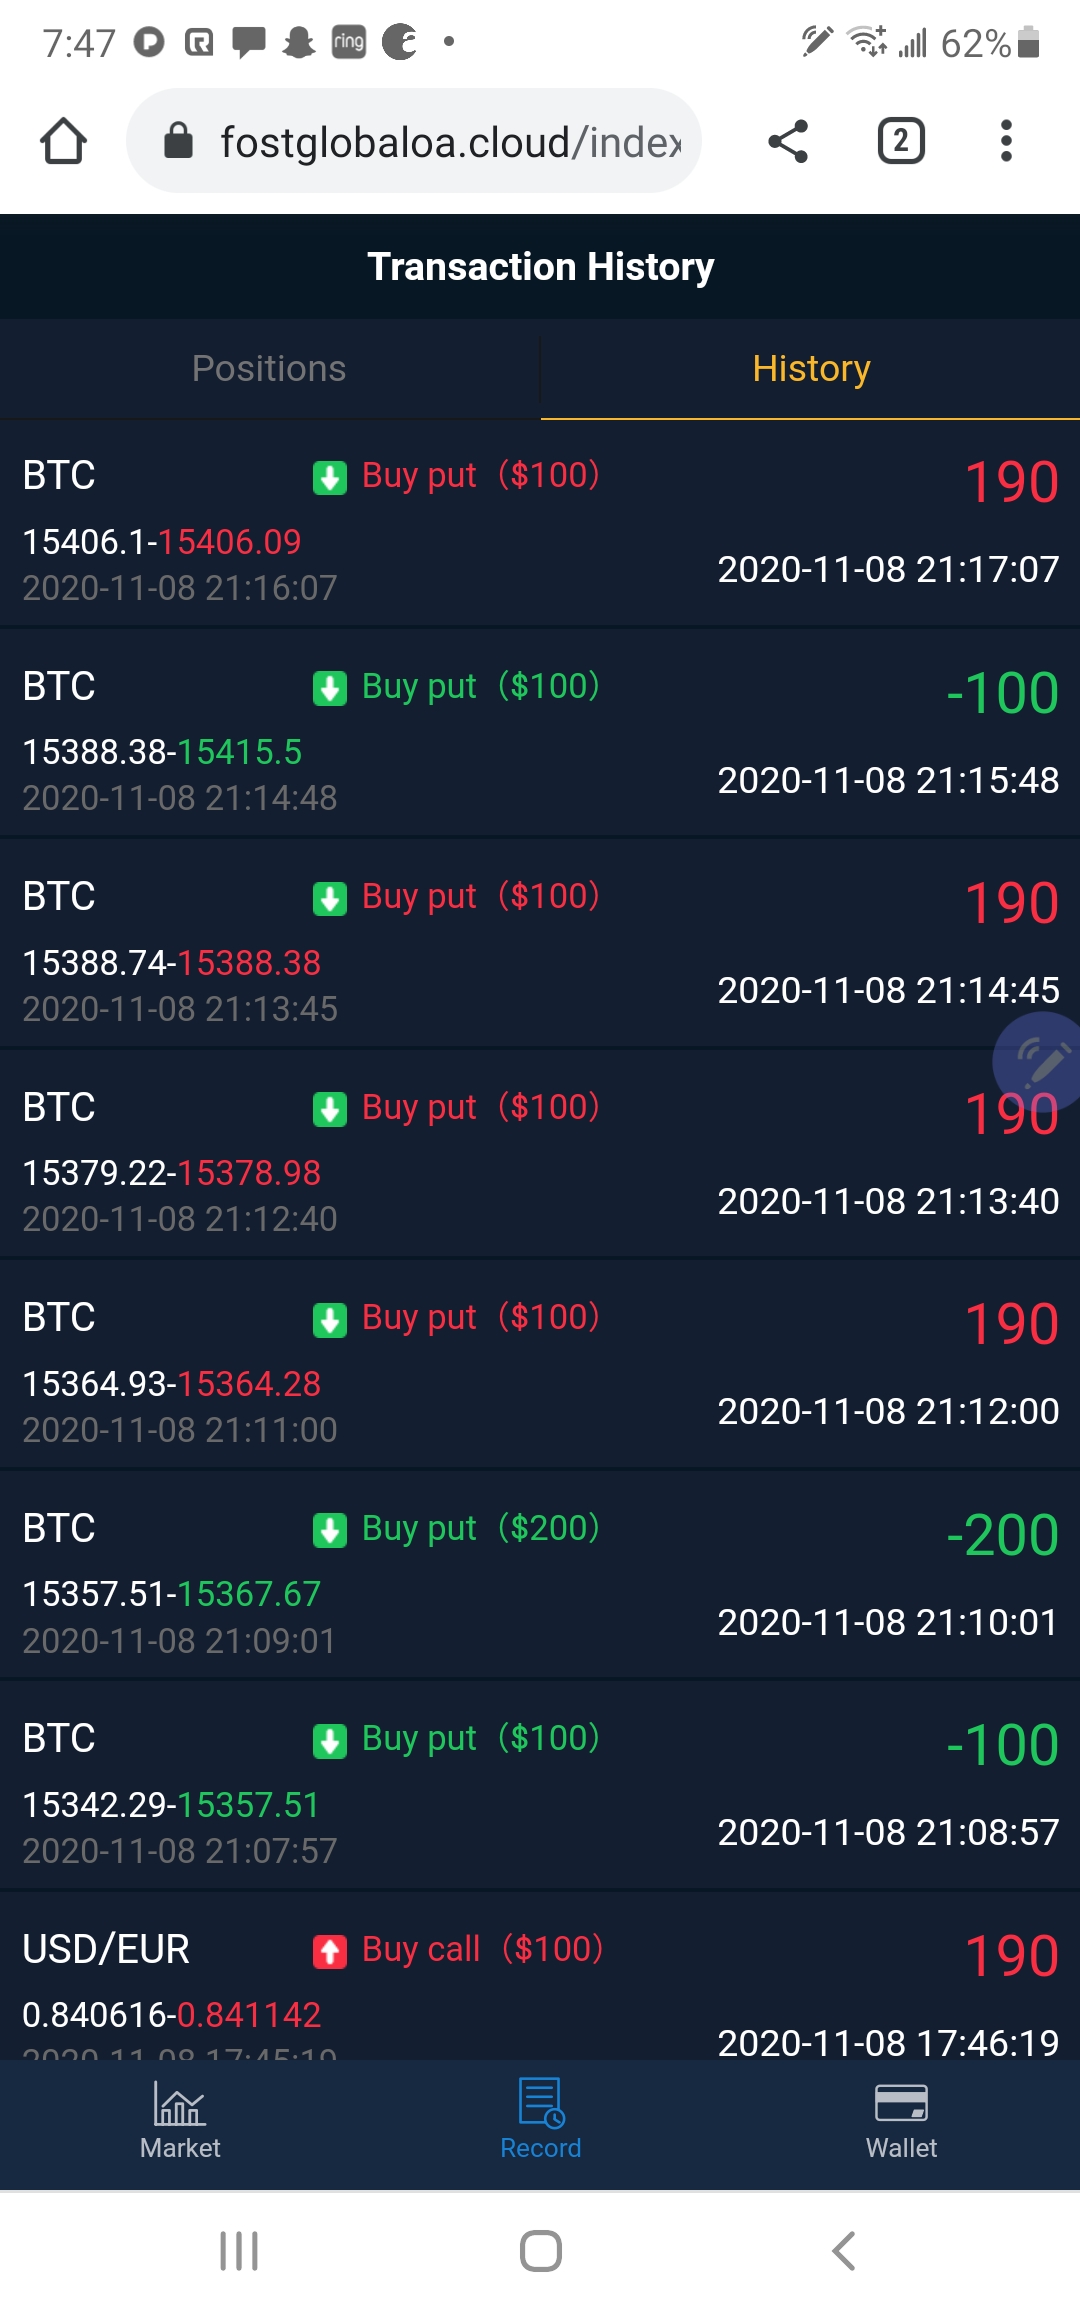 My transaction history showing profits in red